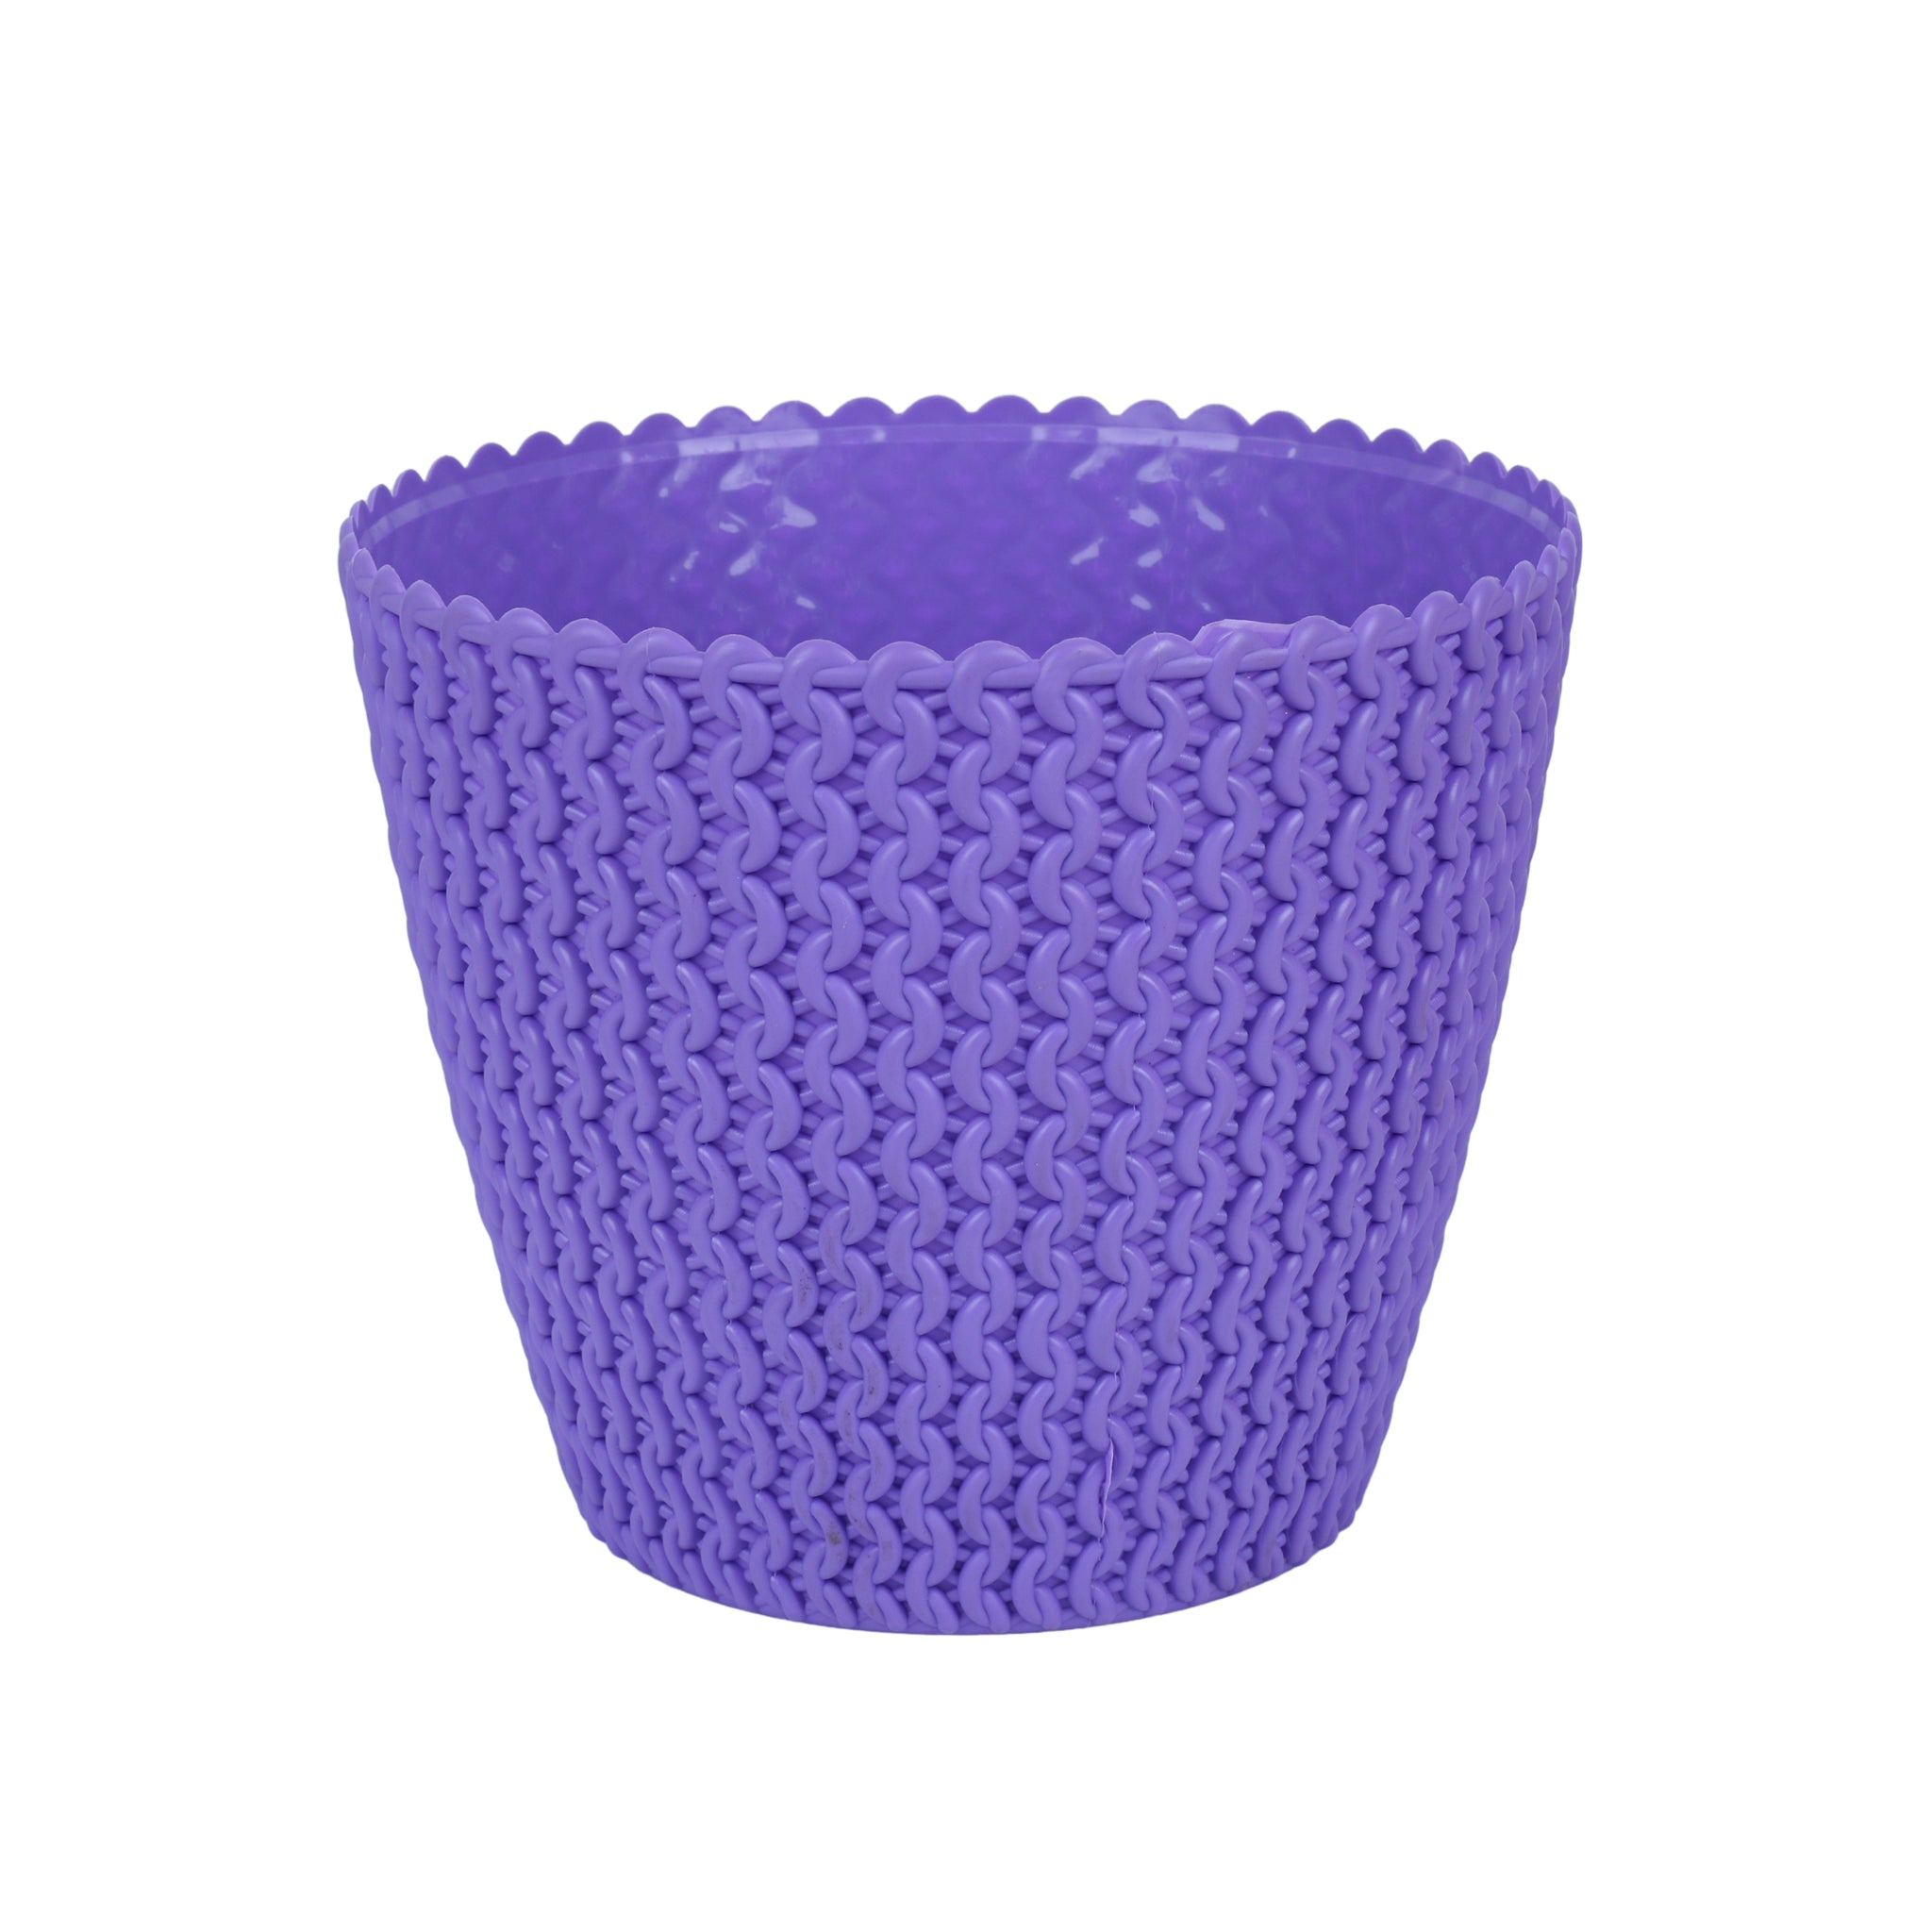 Utkarsh Super High-Quality|UV Treated|Highly Durable Plastic Garden Woven/Round Flower/Plant Pots for Home Planters, Terrace, Garden, Balcony|Multicolor|Suitable for Home Indoor & Outdoor Gardening Plants